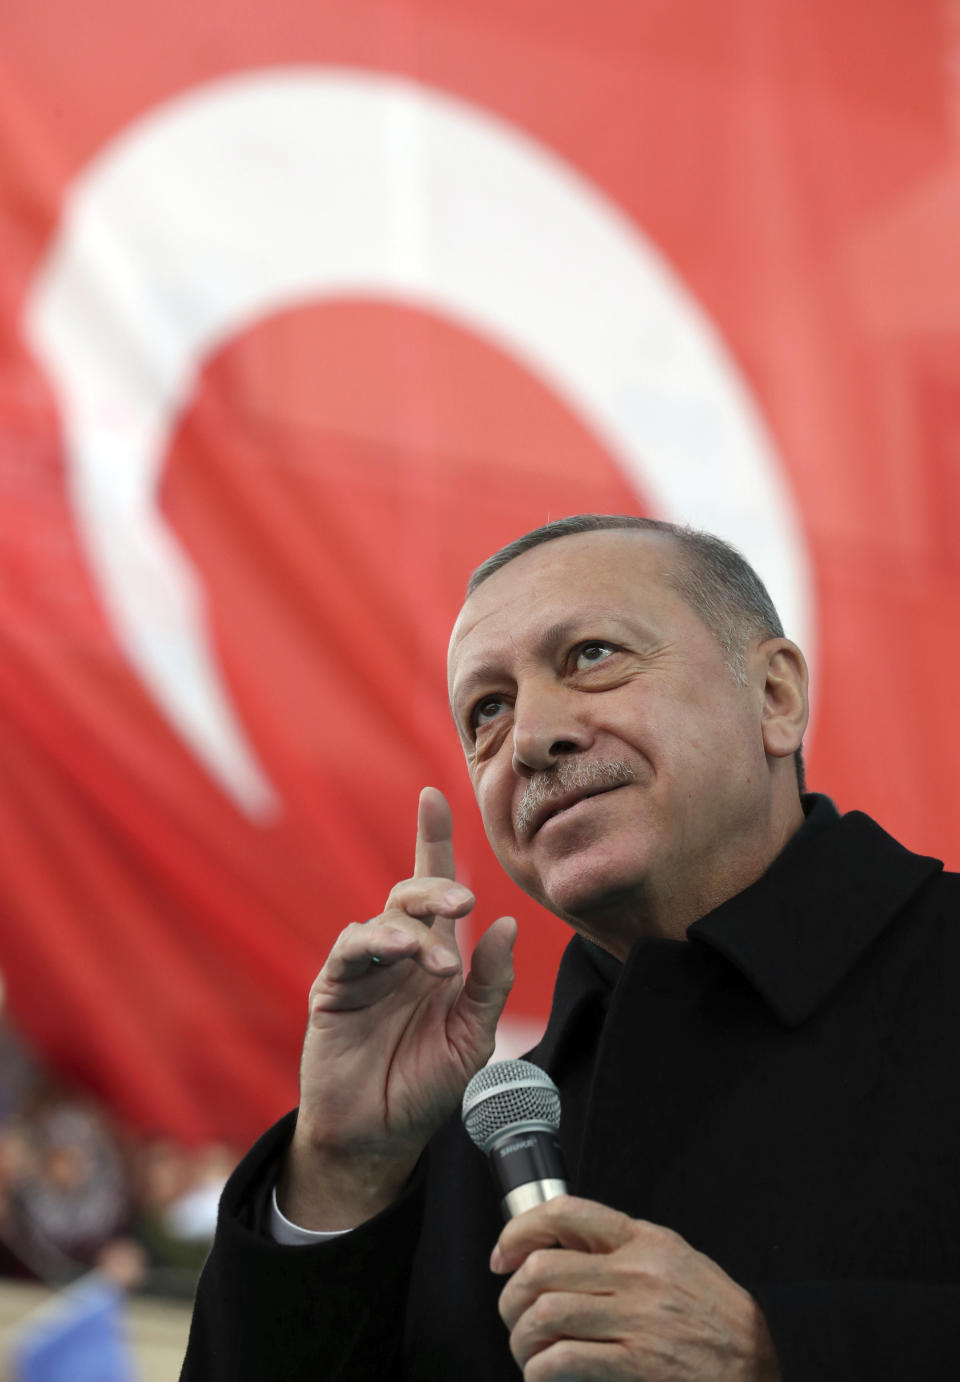 Turkey's President Recep Tayyip Erdogan addresses the supporters of his ruling Justice and Development Party, AKP, during a rally in Ankara, Turkey, Wednesday, March 13, 2019. Erdogan has laid in to Israeli Prime Minister Benjamin Netanyahu, calling him a "thief" and a "tyrant" in the latest spat between the two leaders.(Presidential Press Service via AP, Pool)